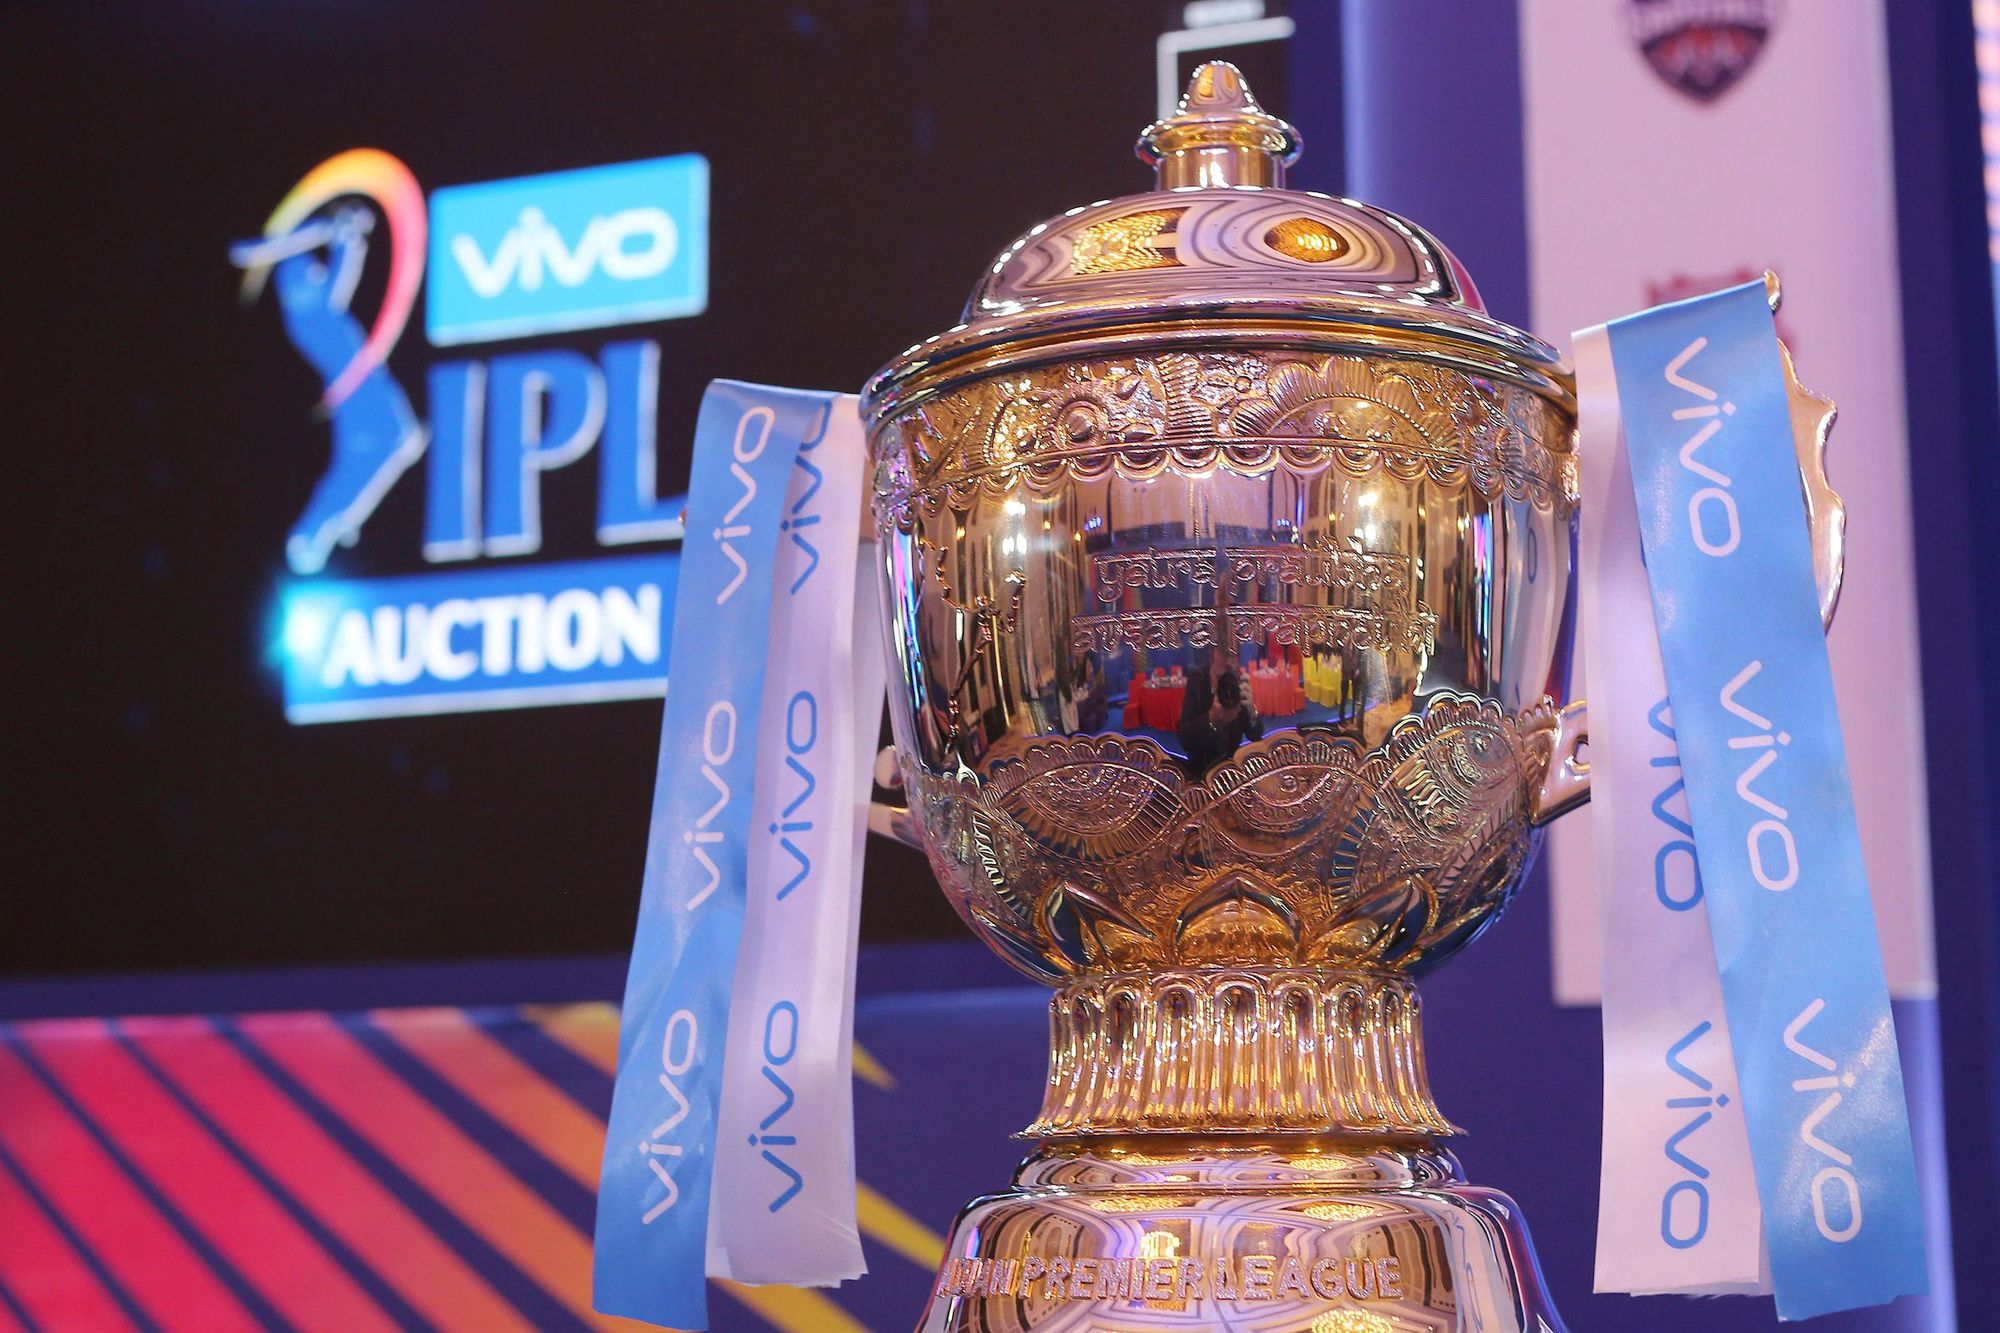 IPL 2022 mega auction is reportedly happening in February next year